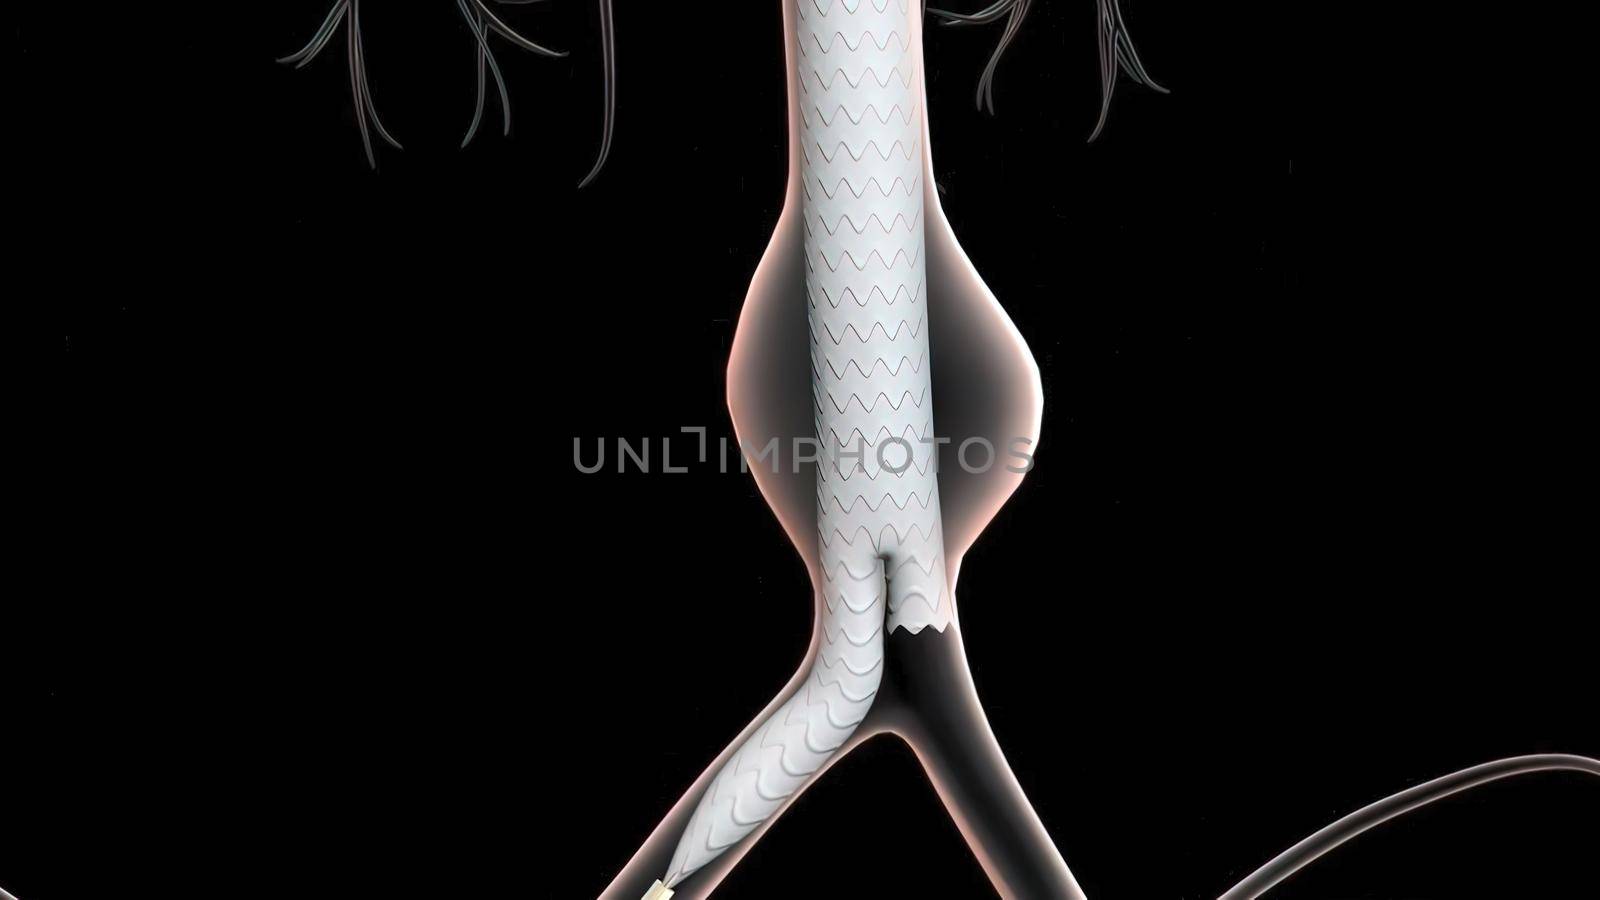 3D medical illustration of pulsatile Abdominal Aortic Aneurysm by creativepic